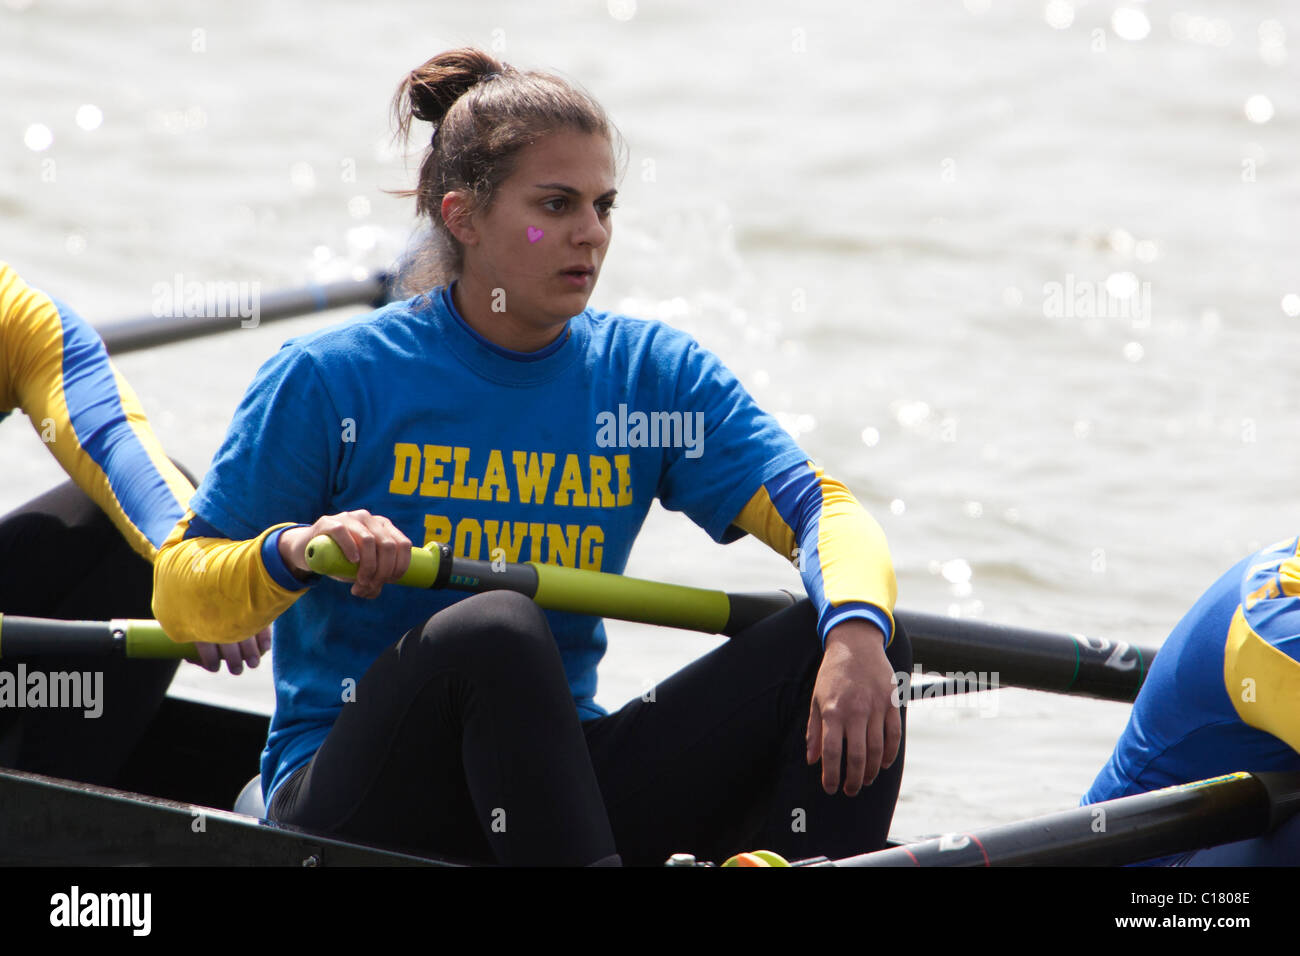 A University of Delaware student competing in the George Washington University Rowing Regatta on the Potomac River. Stock Photo